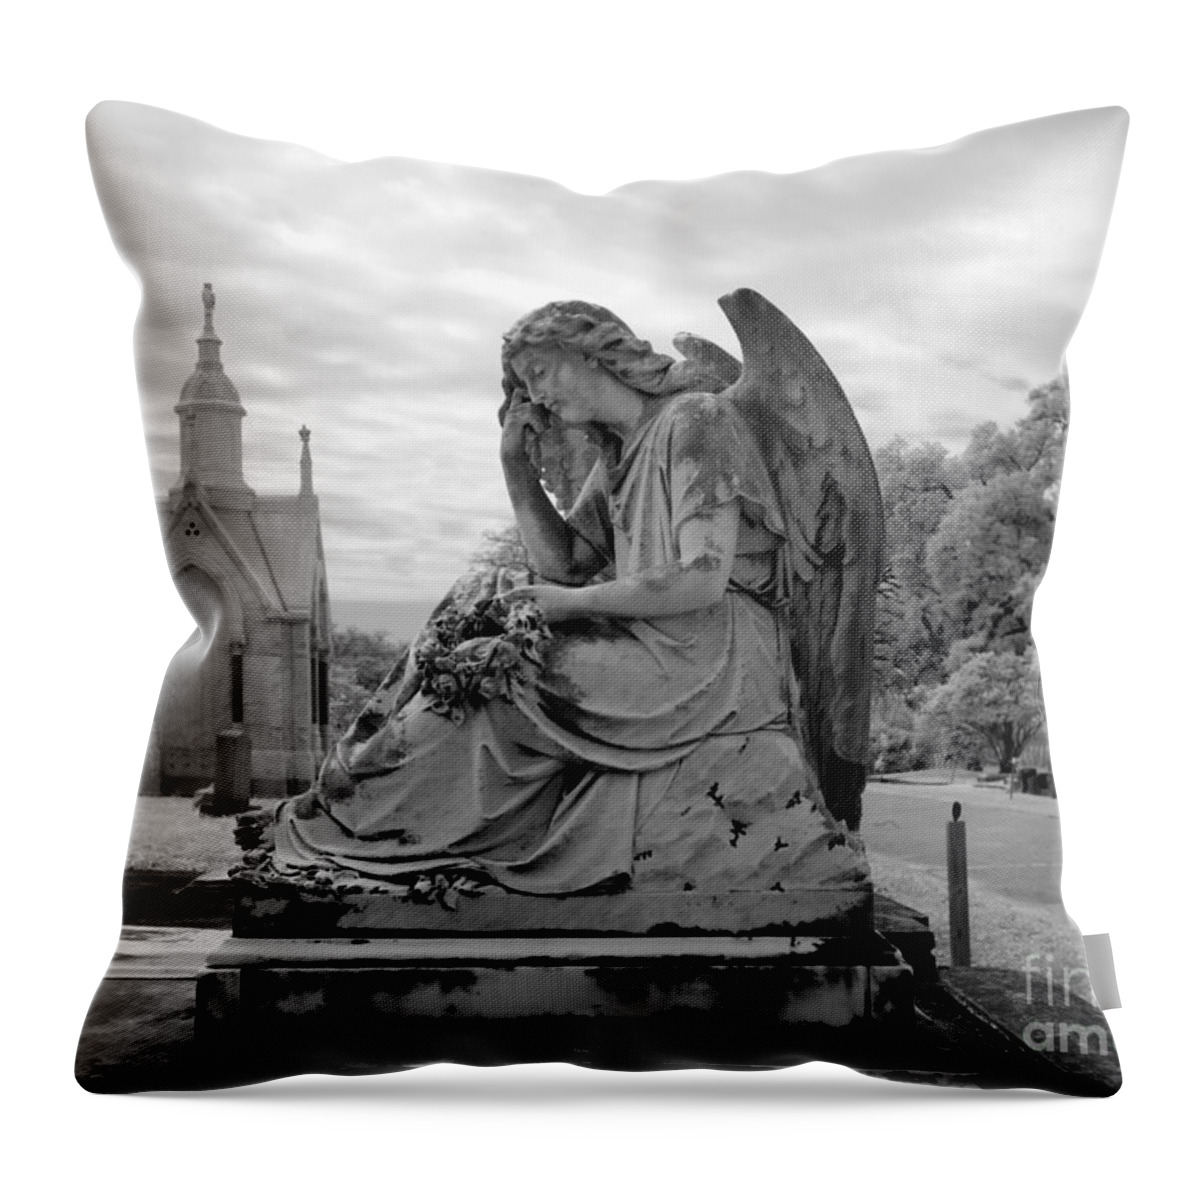 2010 Throw Pillow featuring the photograph Angel Tombstone, 2010 by Carol Highsmith